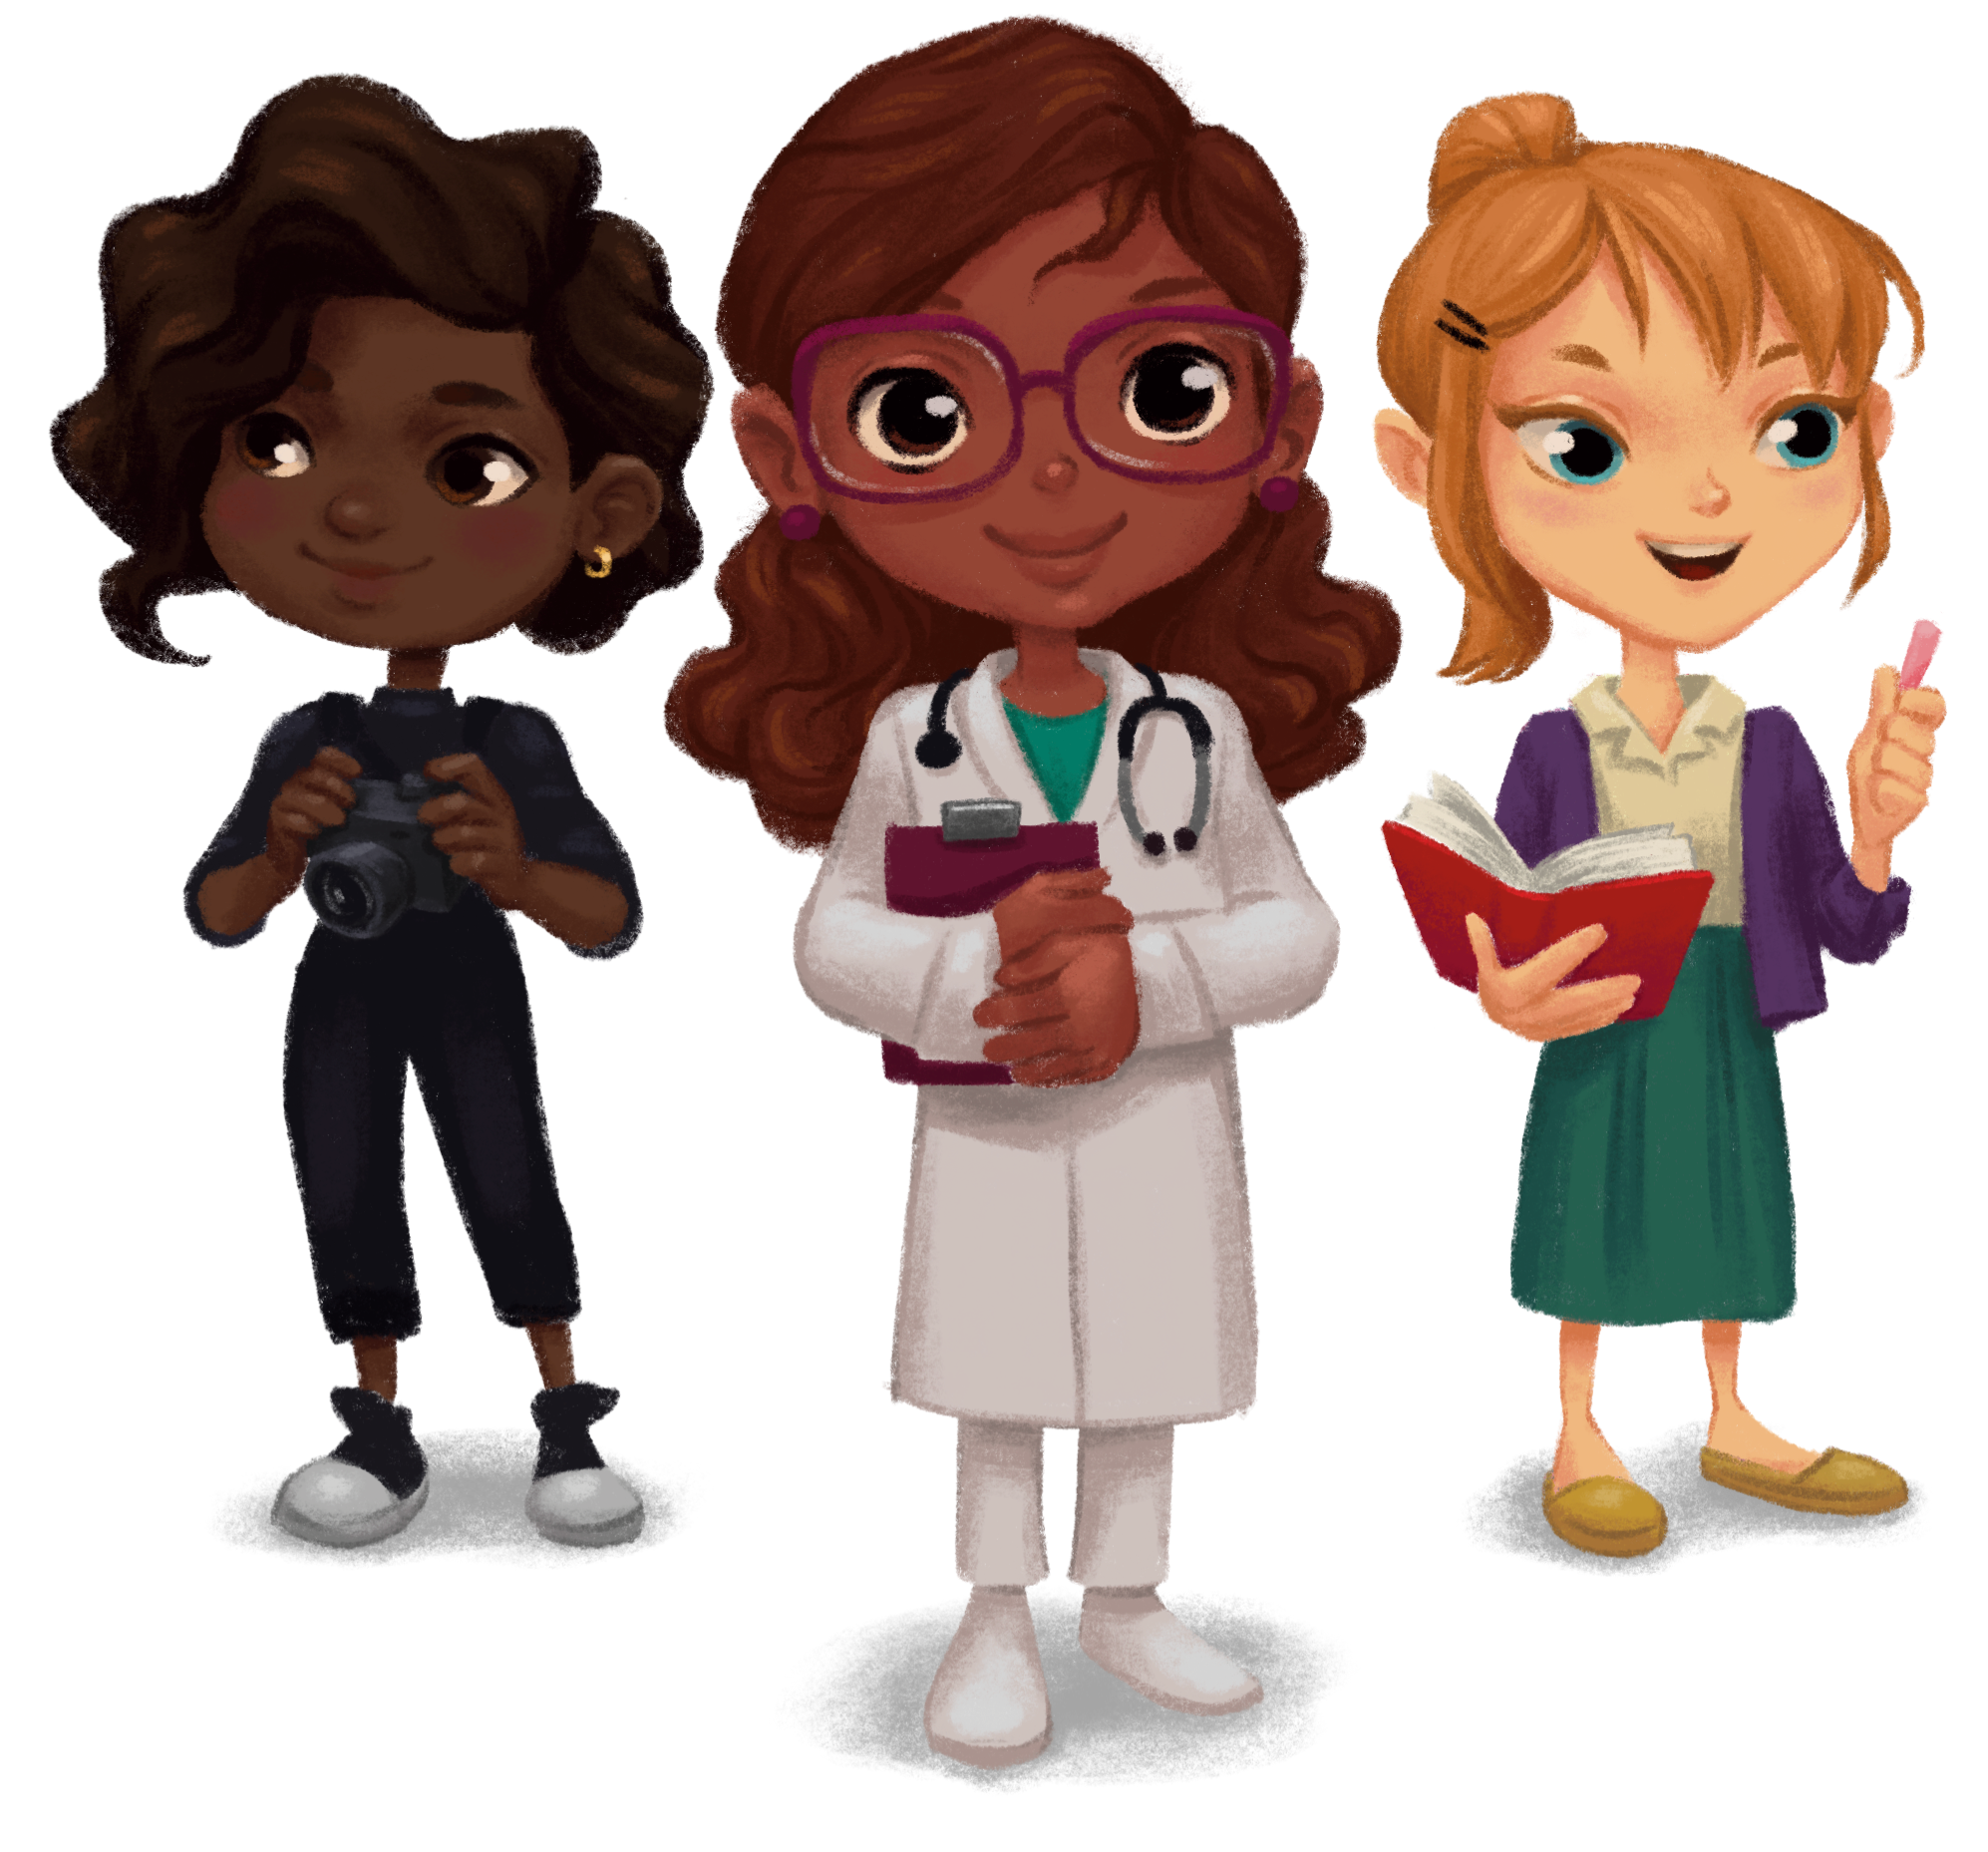 illustration of three girls in professional clothes. On the left is a black girl dressed as a photographer, in the center is a brunette girl dressed as a doctor and on the right is a white and blonde girl dressed as a teacher.